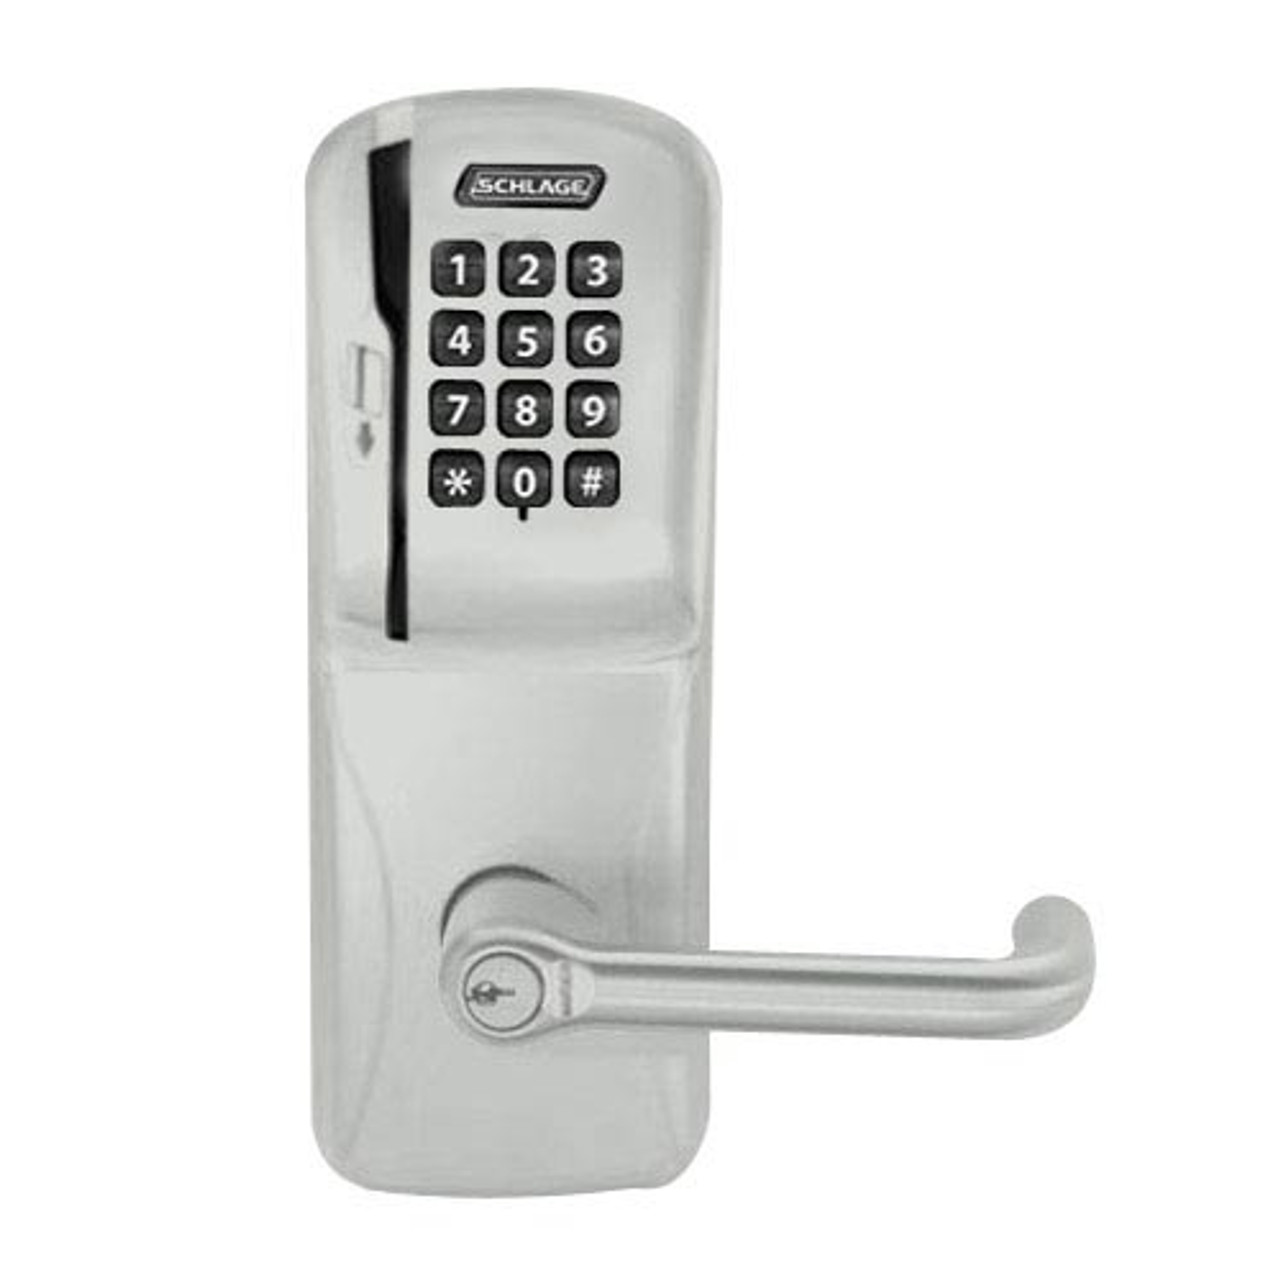 CO200-MS-50-MSK-TLR-GD-29R-619 Mortise Electronic Swipe with Keypad Locks in Satin Nickel